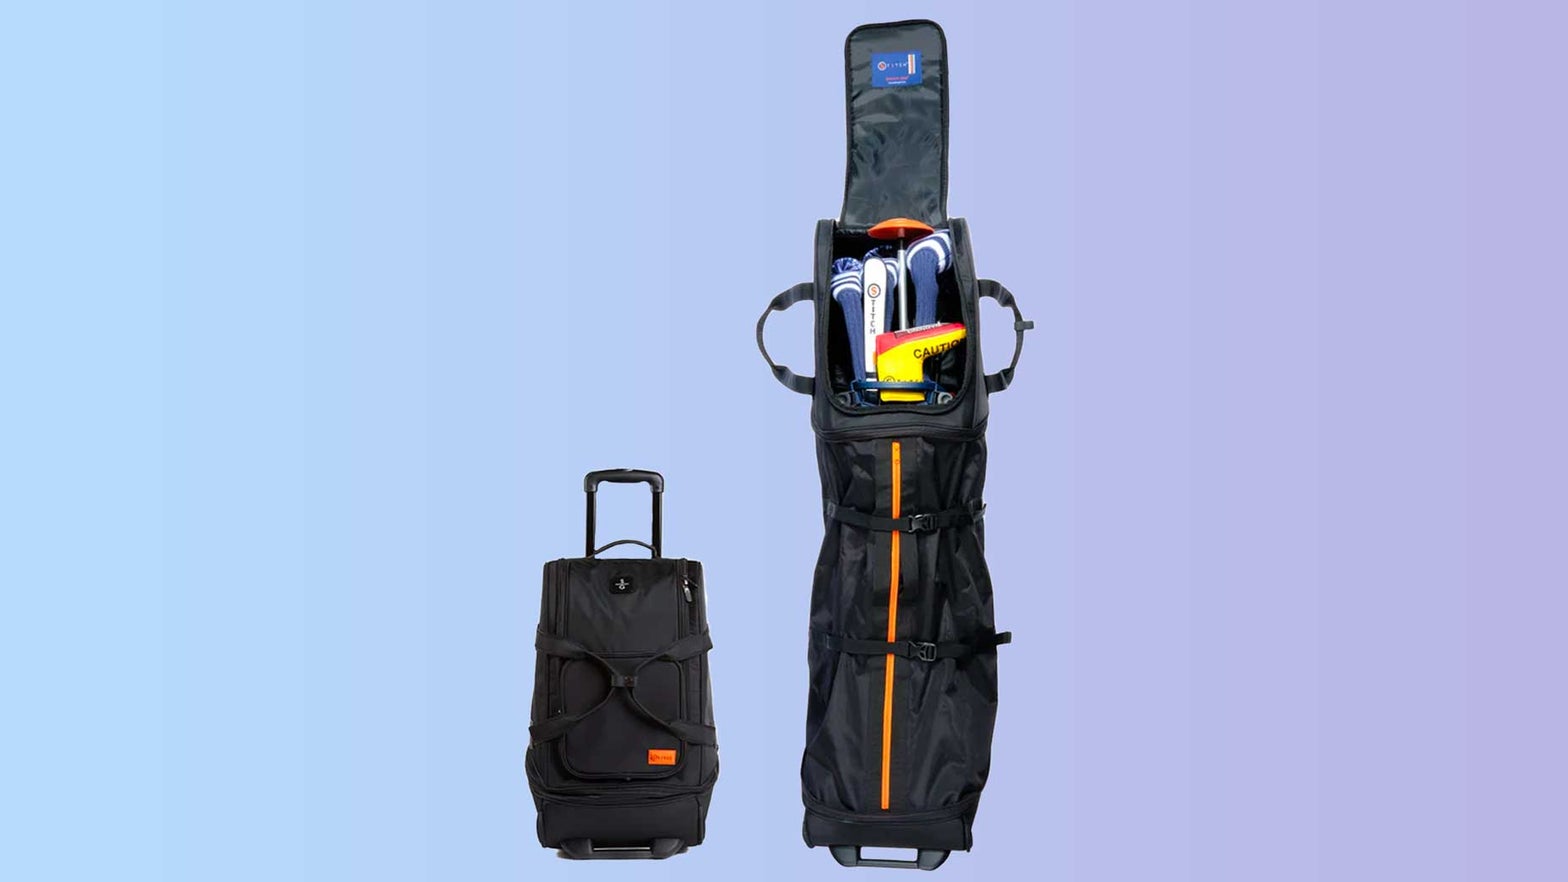 This two-in-one travel bag is the ultimate luggage for golfers